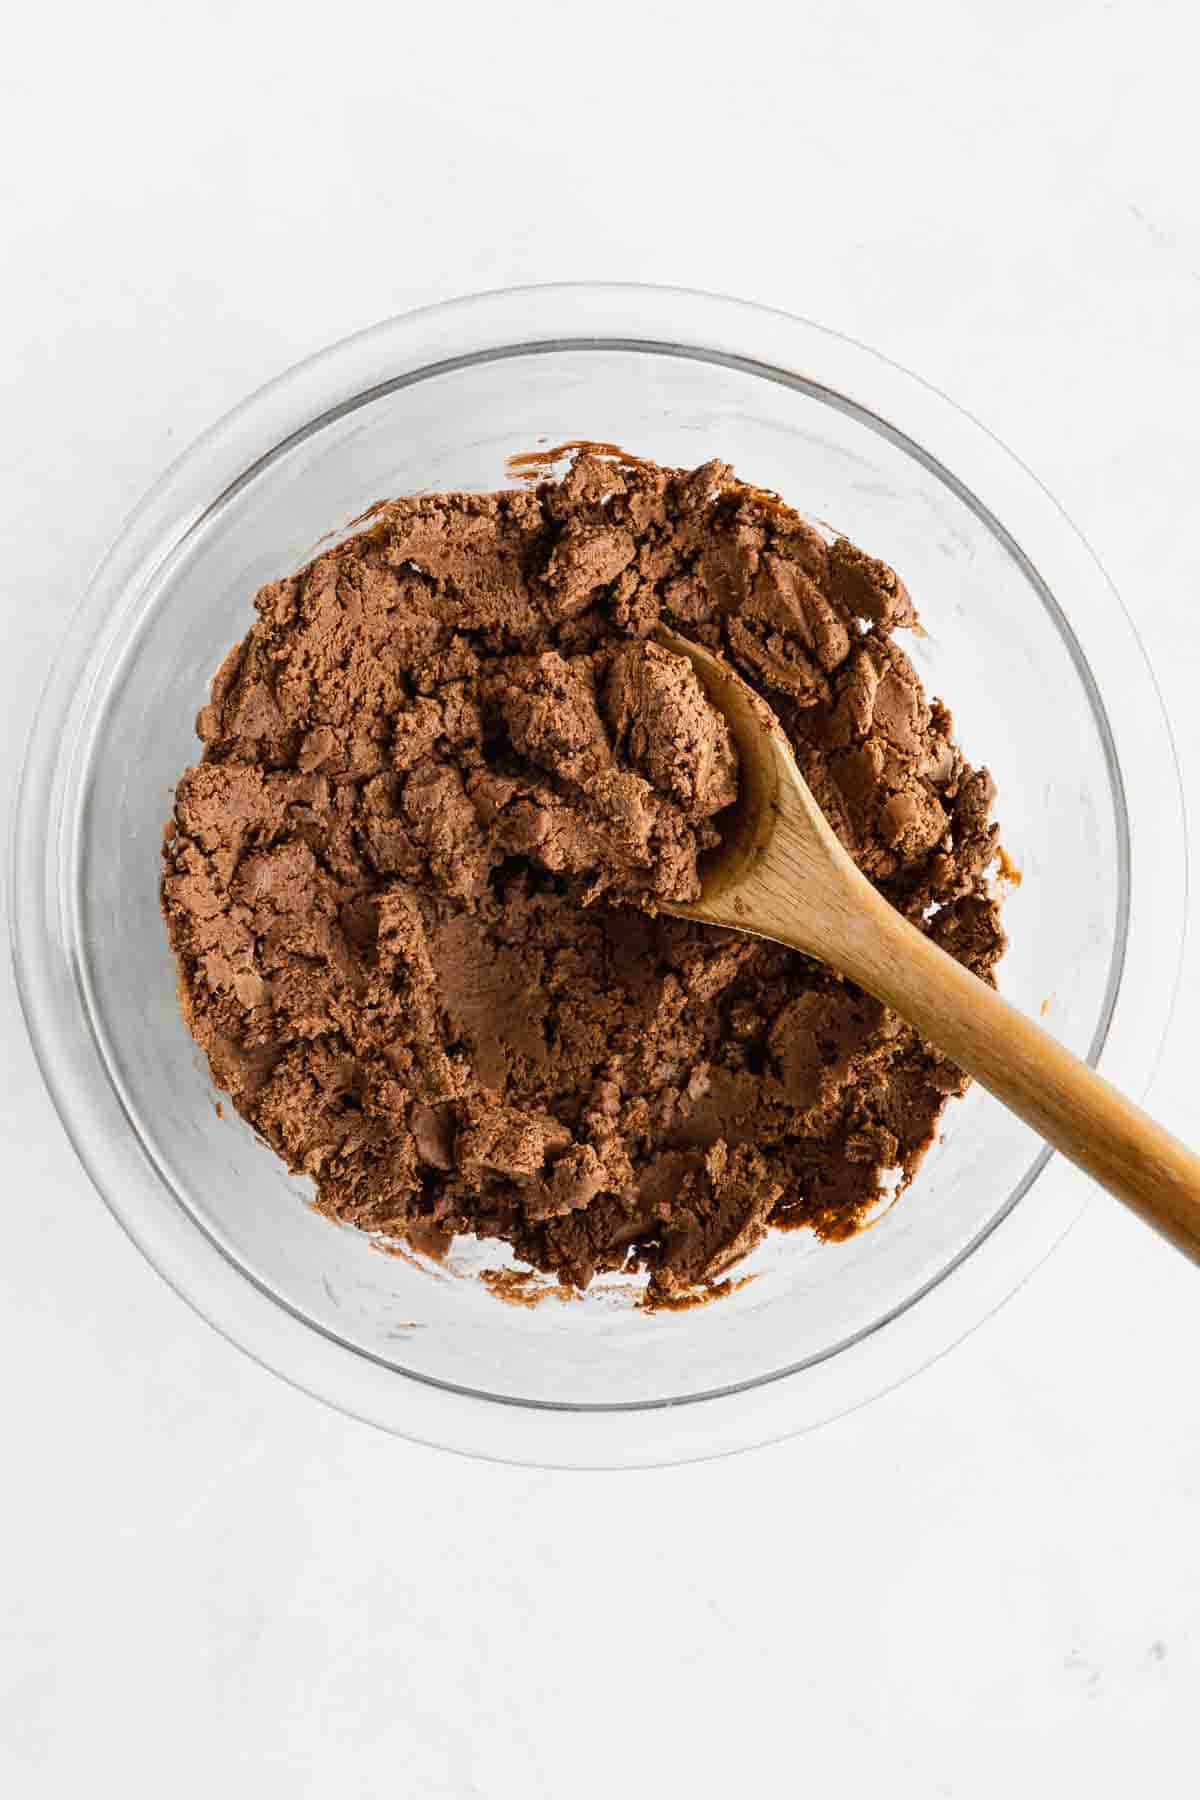 mixing chocolate dough for vegan protein bars in a glass bowl